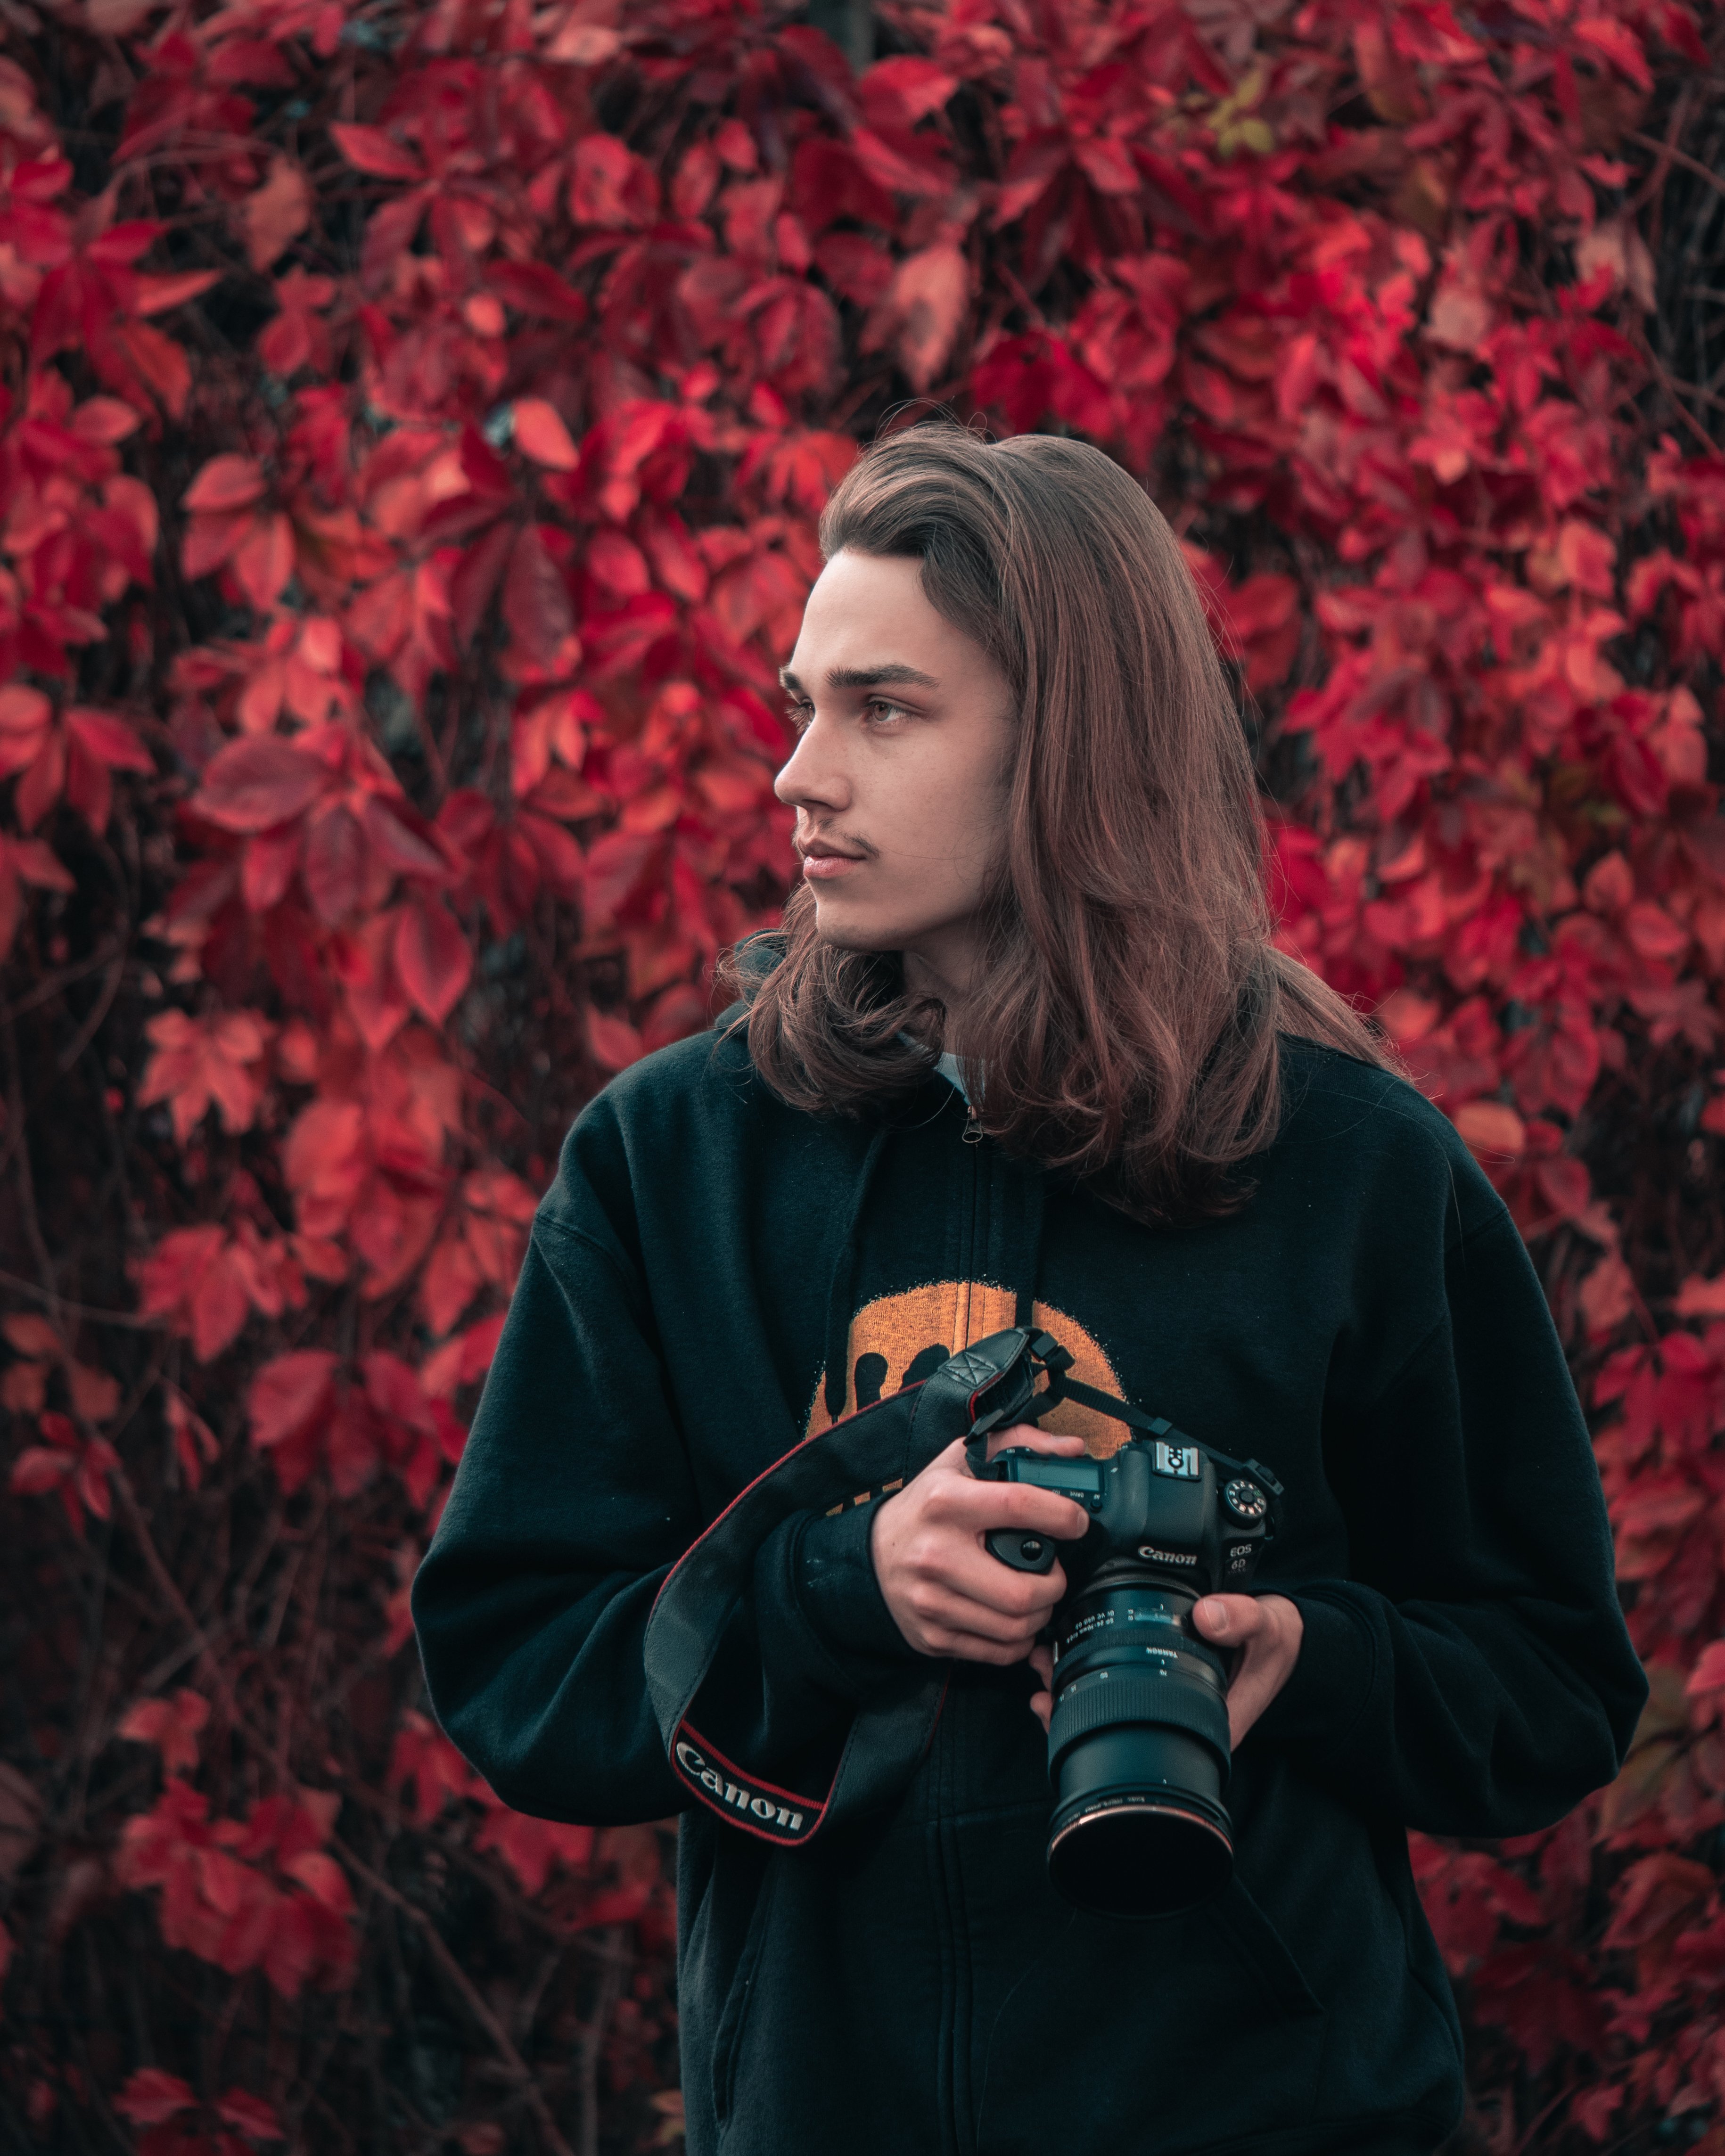 Man with camera standing in front of red leaves. He is wearing a black hoodie with a smile on it. He has long hair.